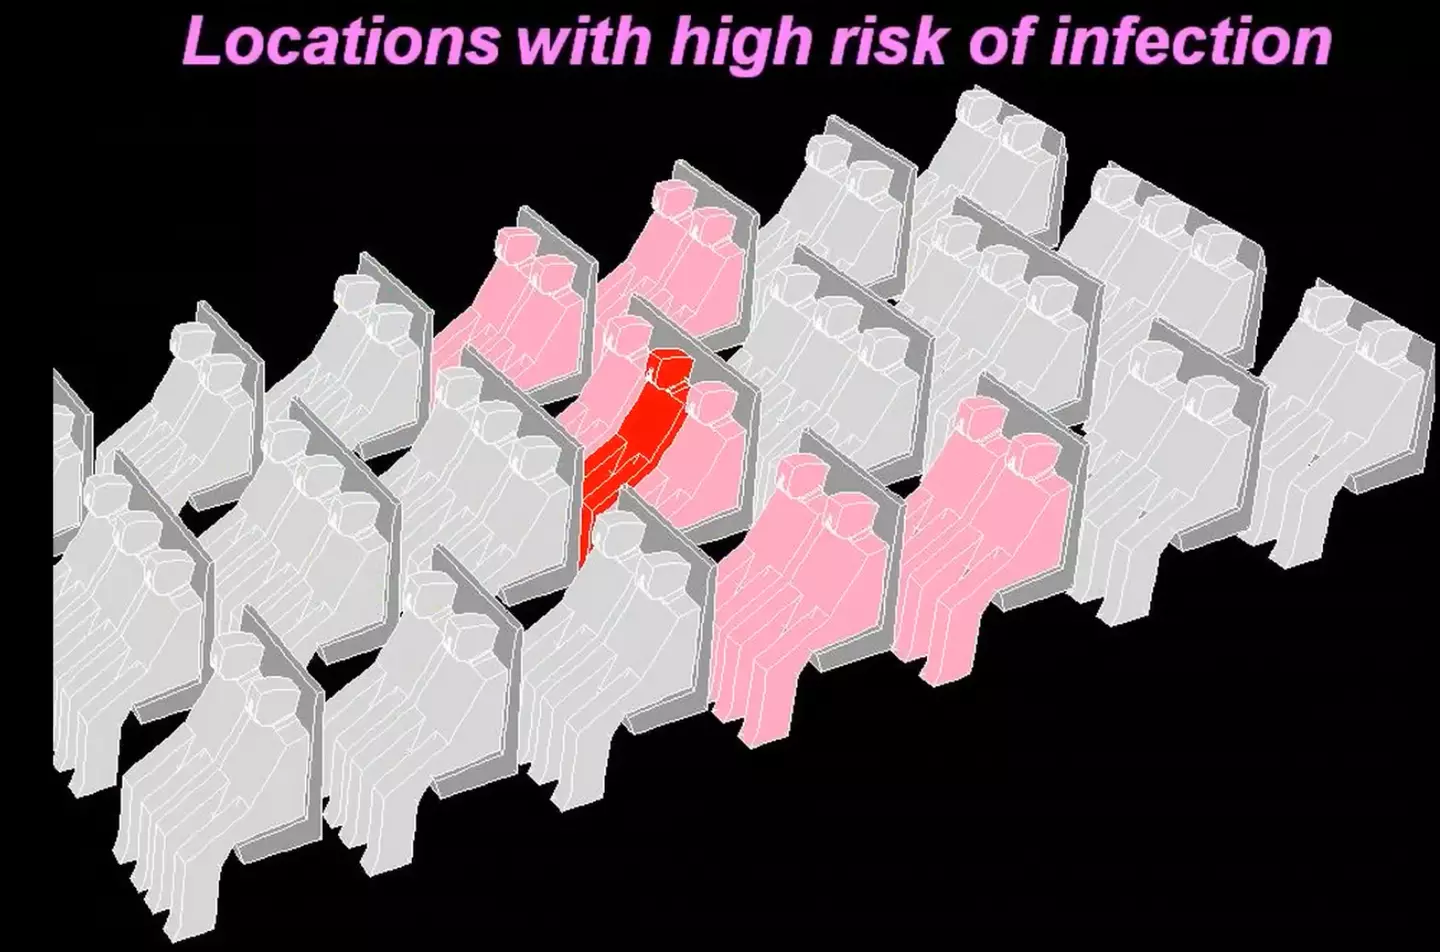 These areas have the highest risk of infection.